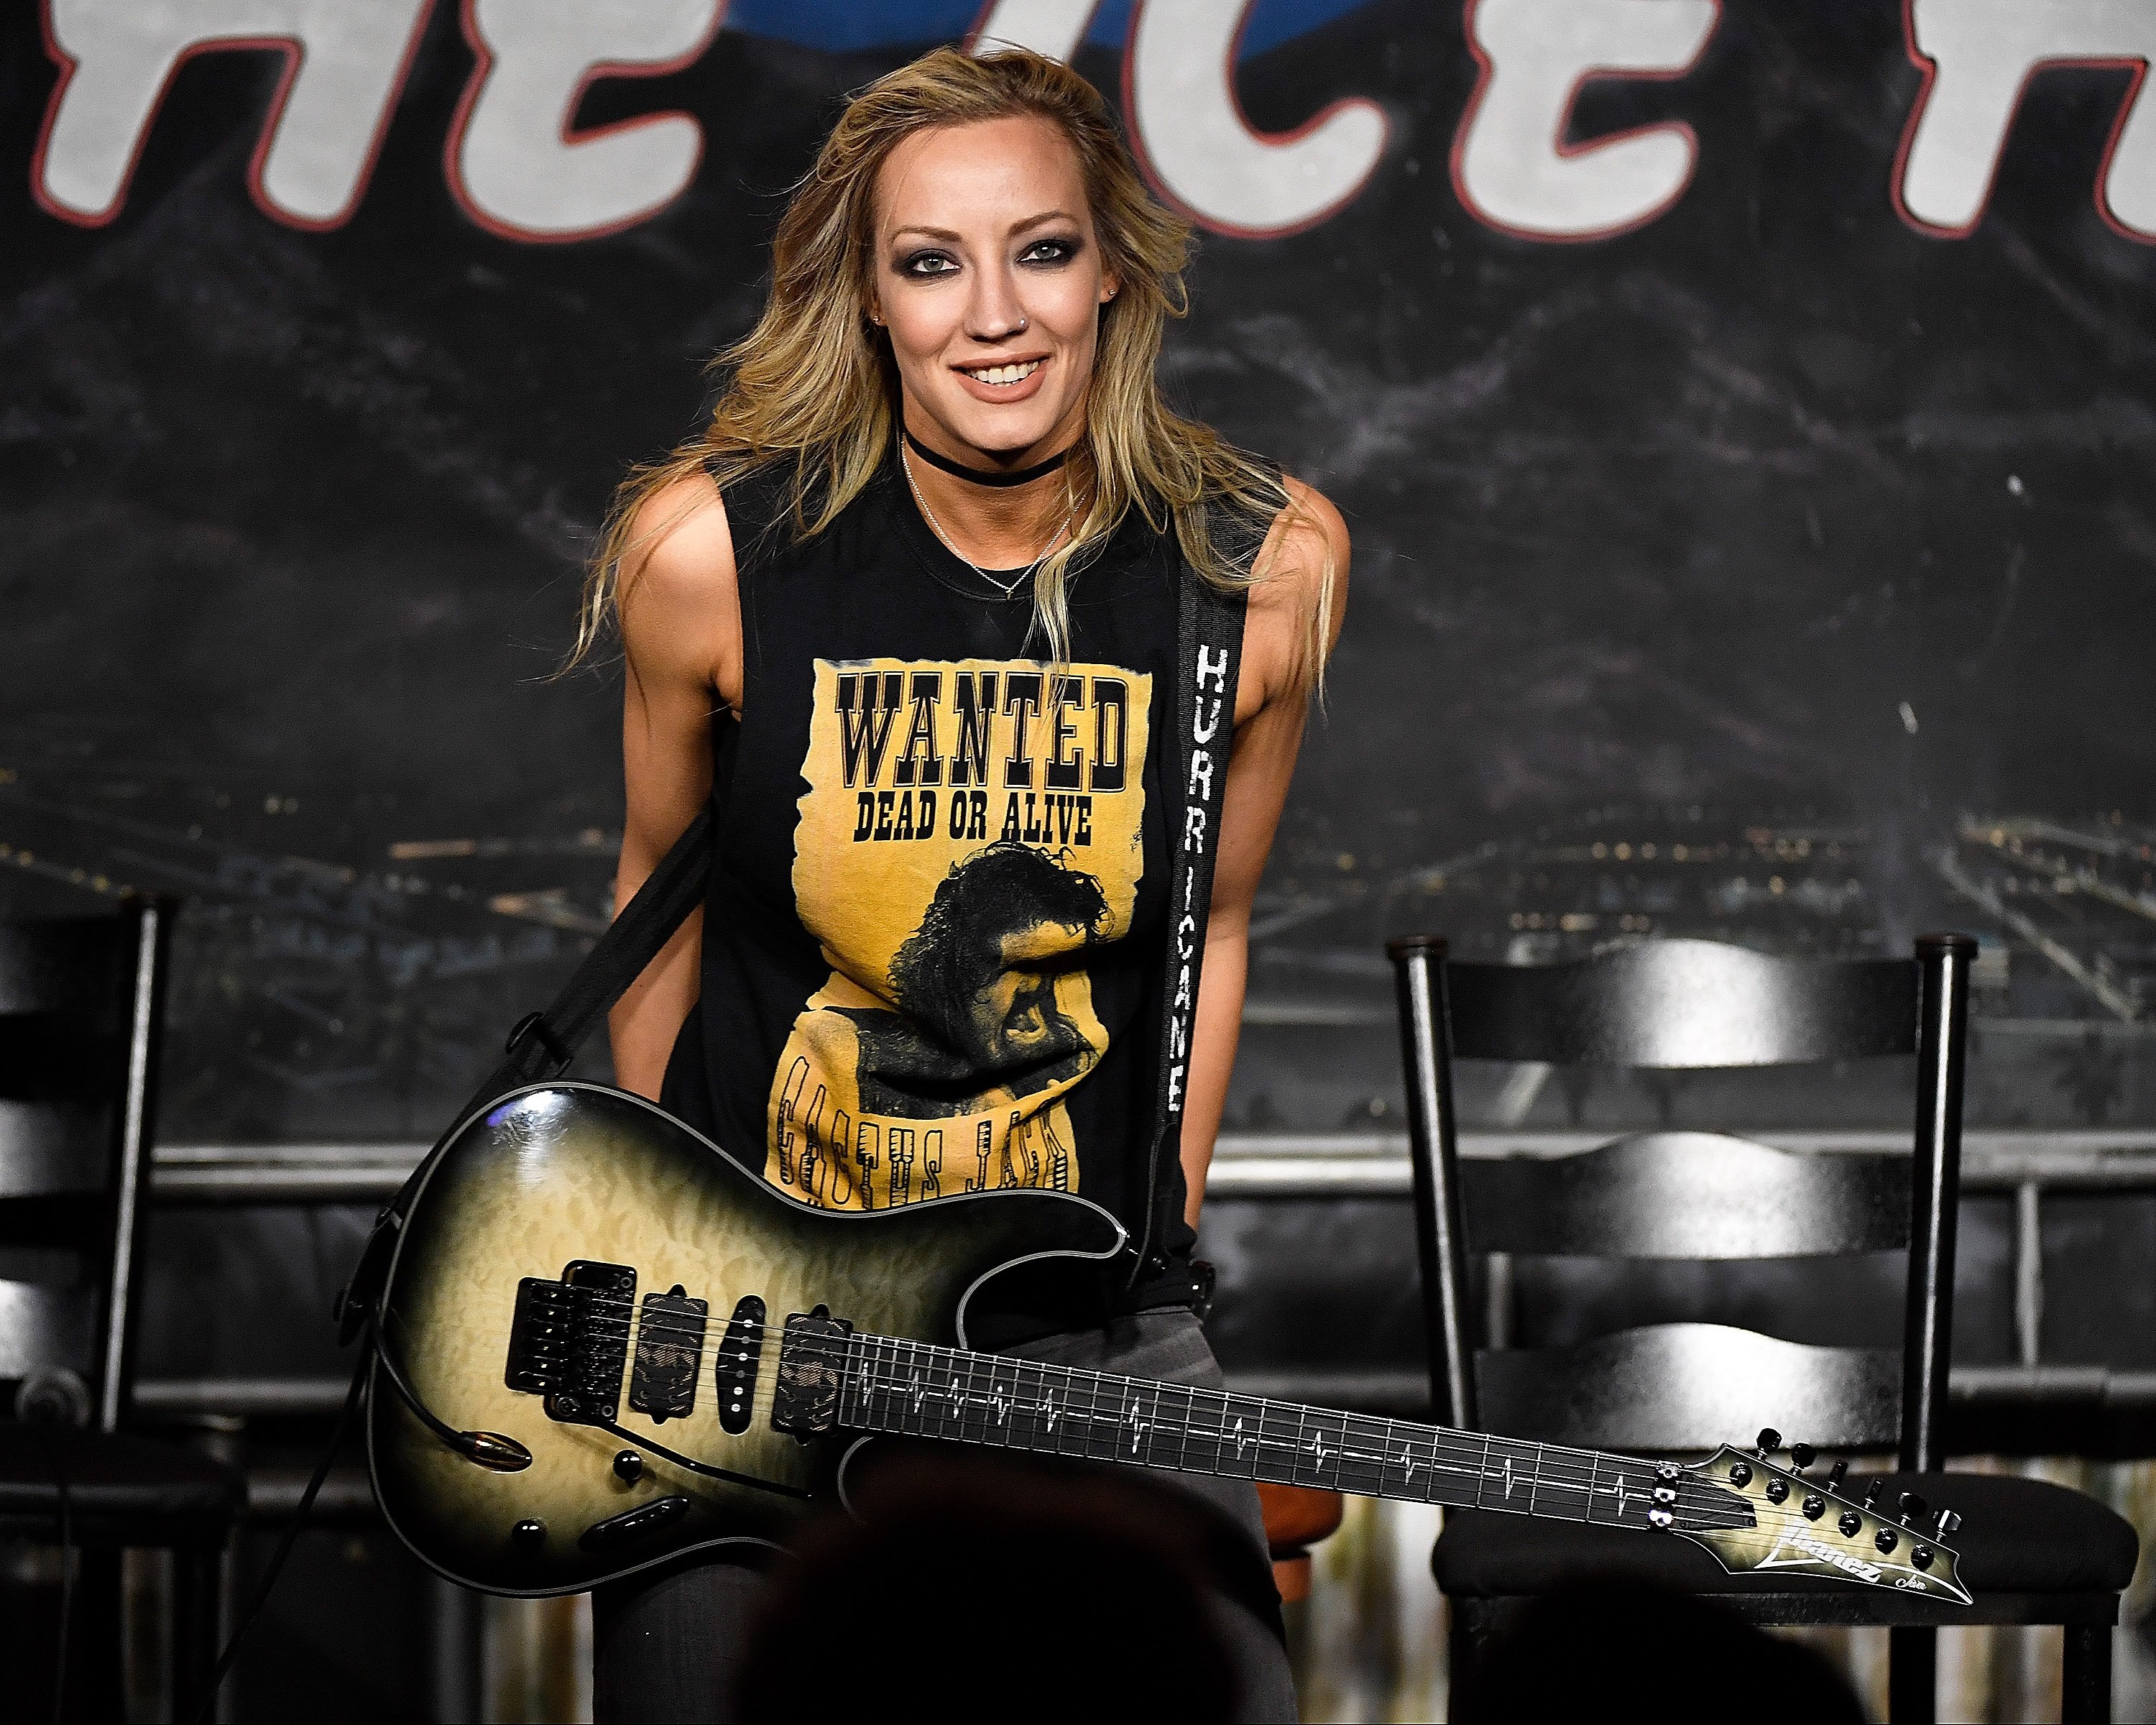 Nita Strauss Opens Up About Playing Shinsuke To The Ring At